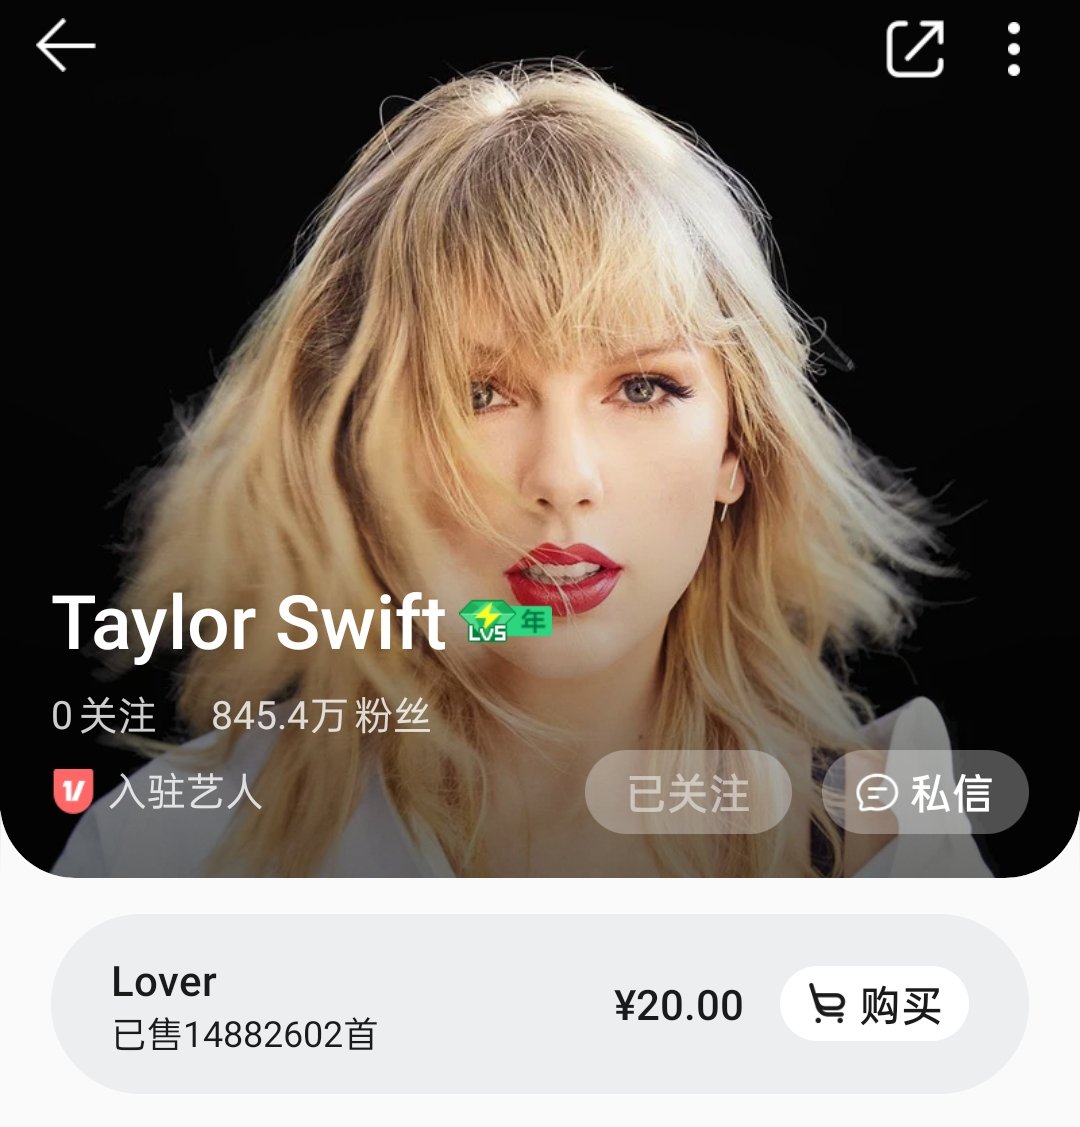 QQ music, the biggest music platform in China, Taylor has 8.4 million followers, and Kanye has 150k